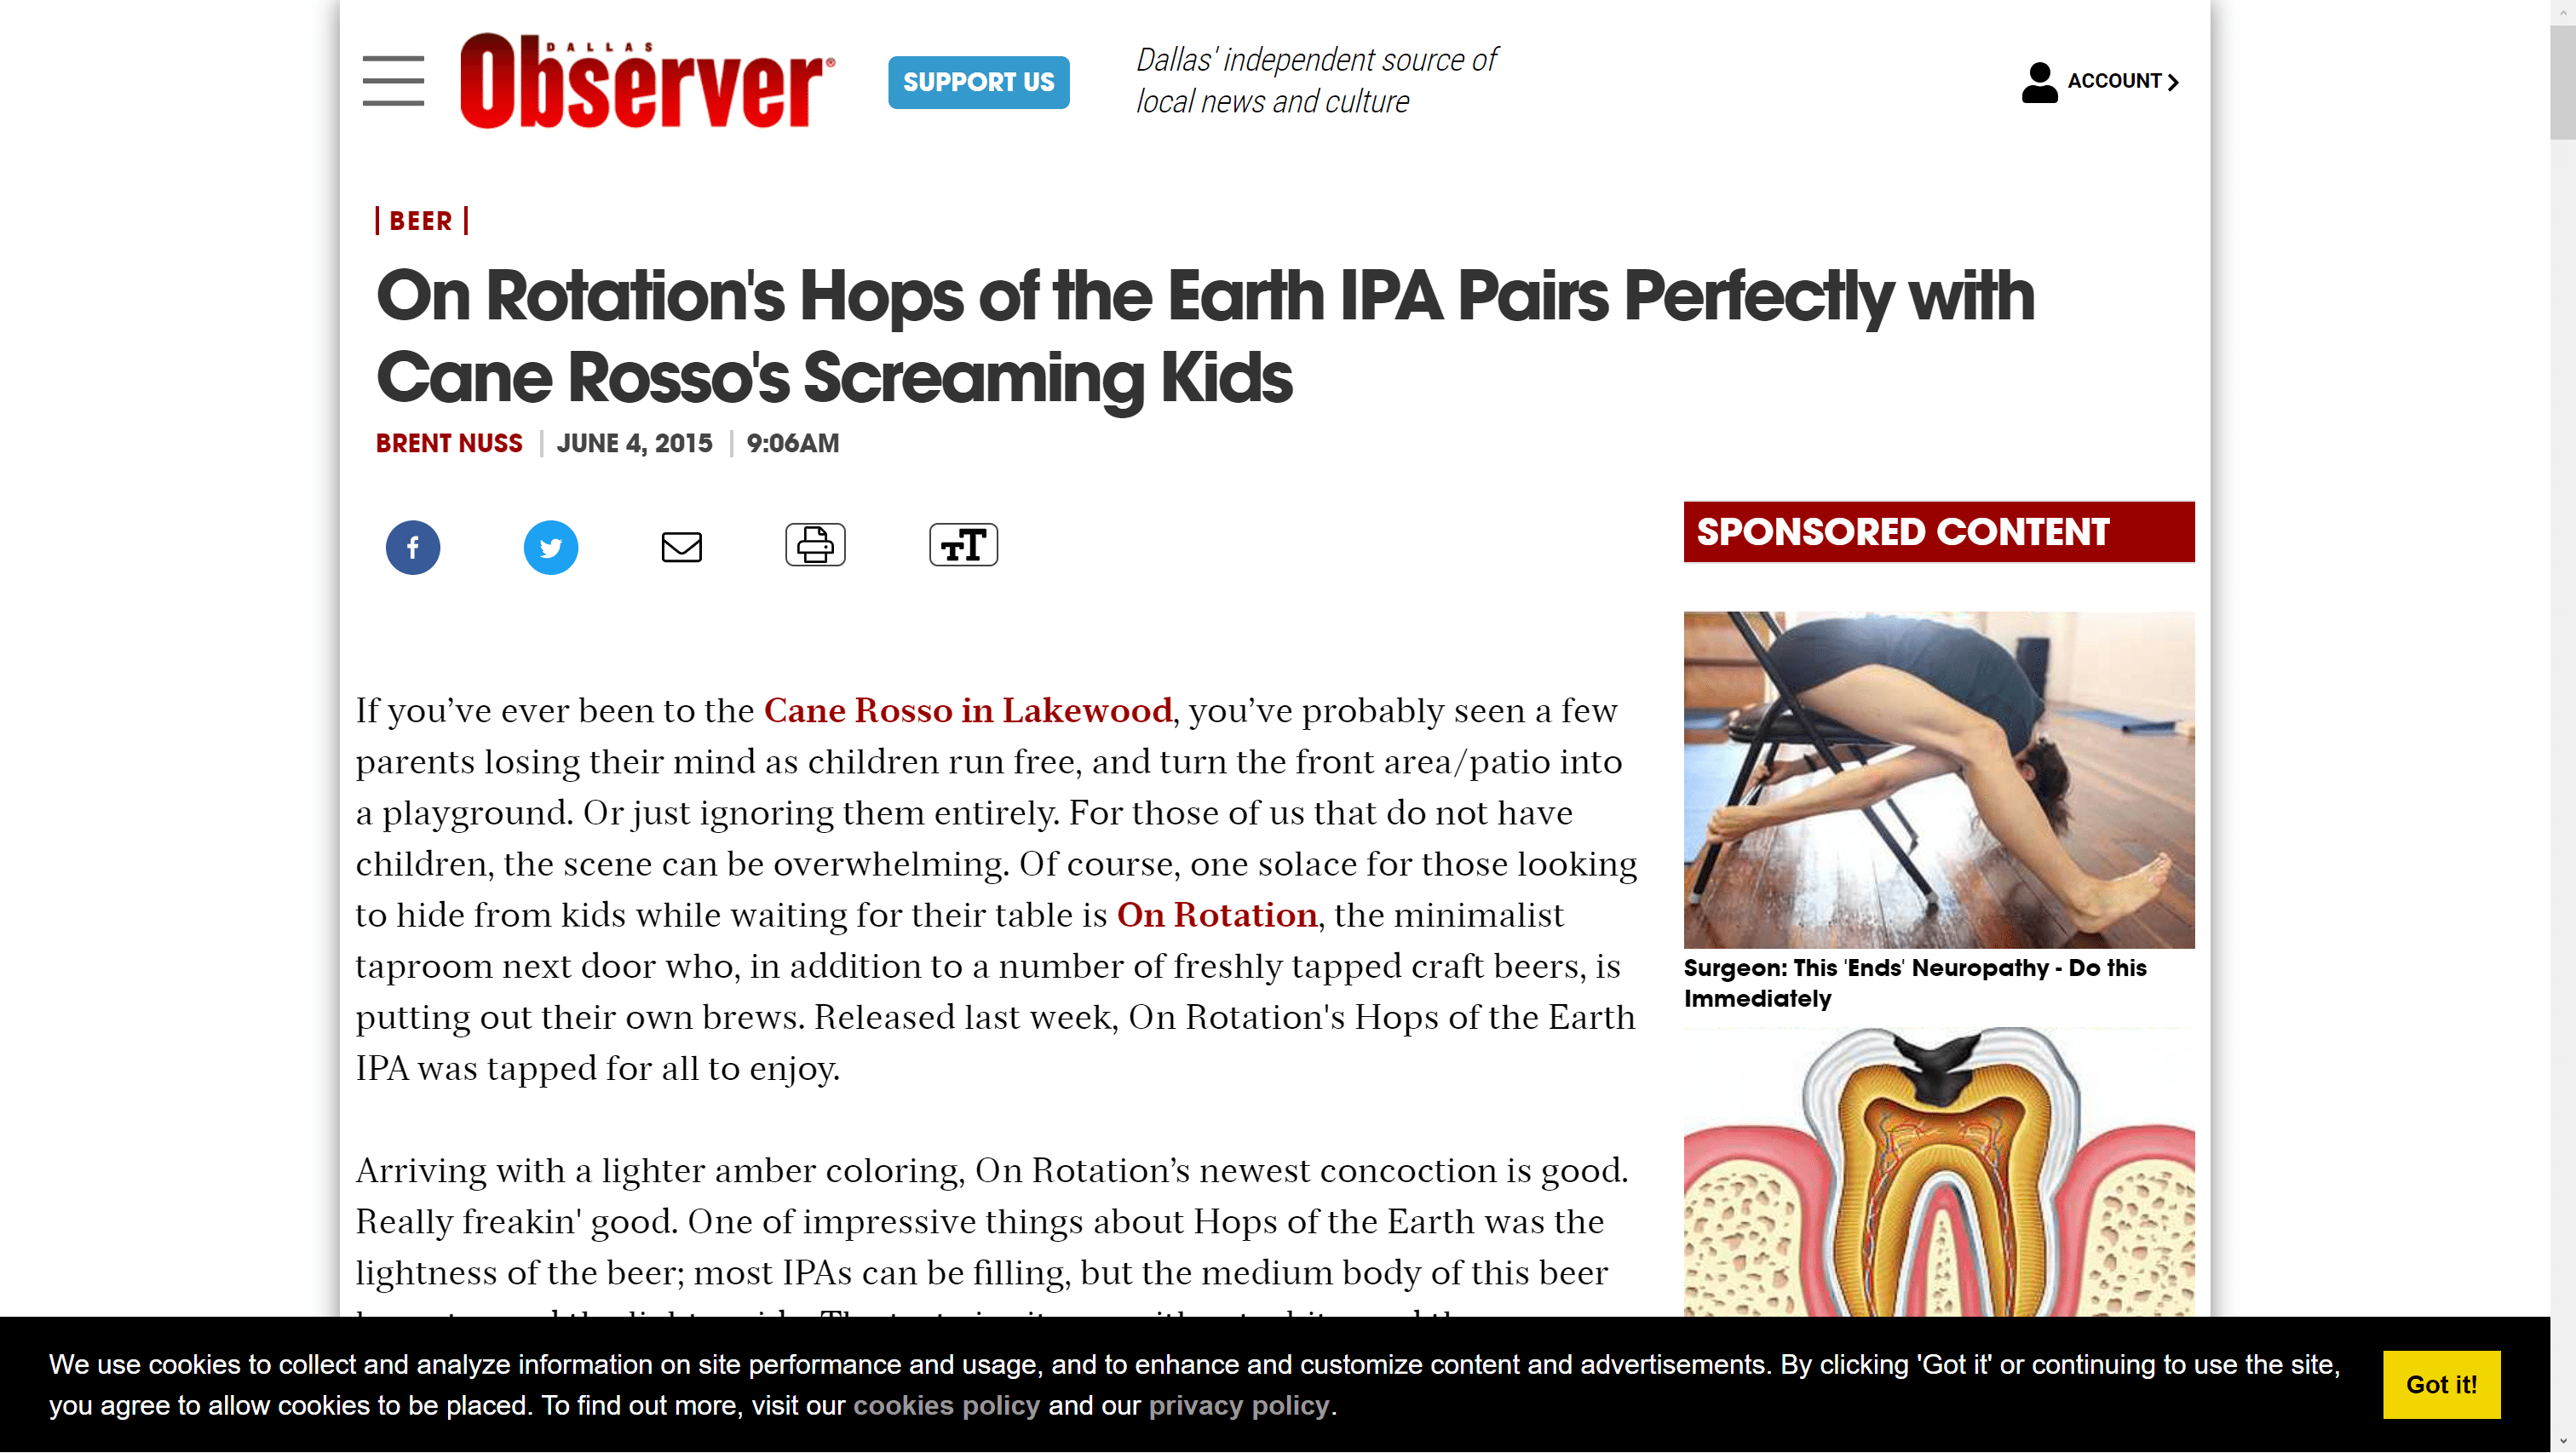 Hops of the Earth in Dallas Observer